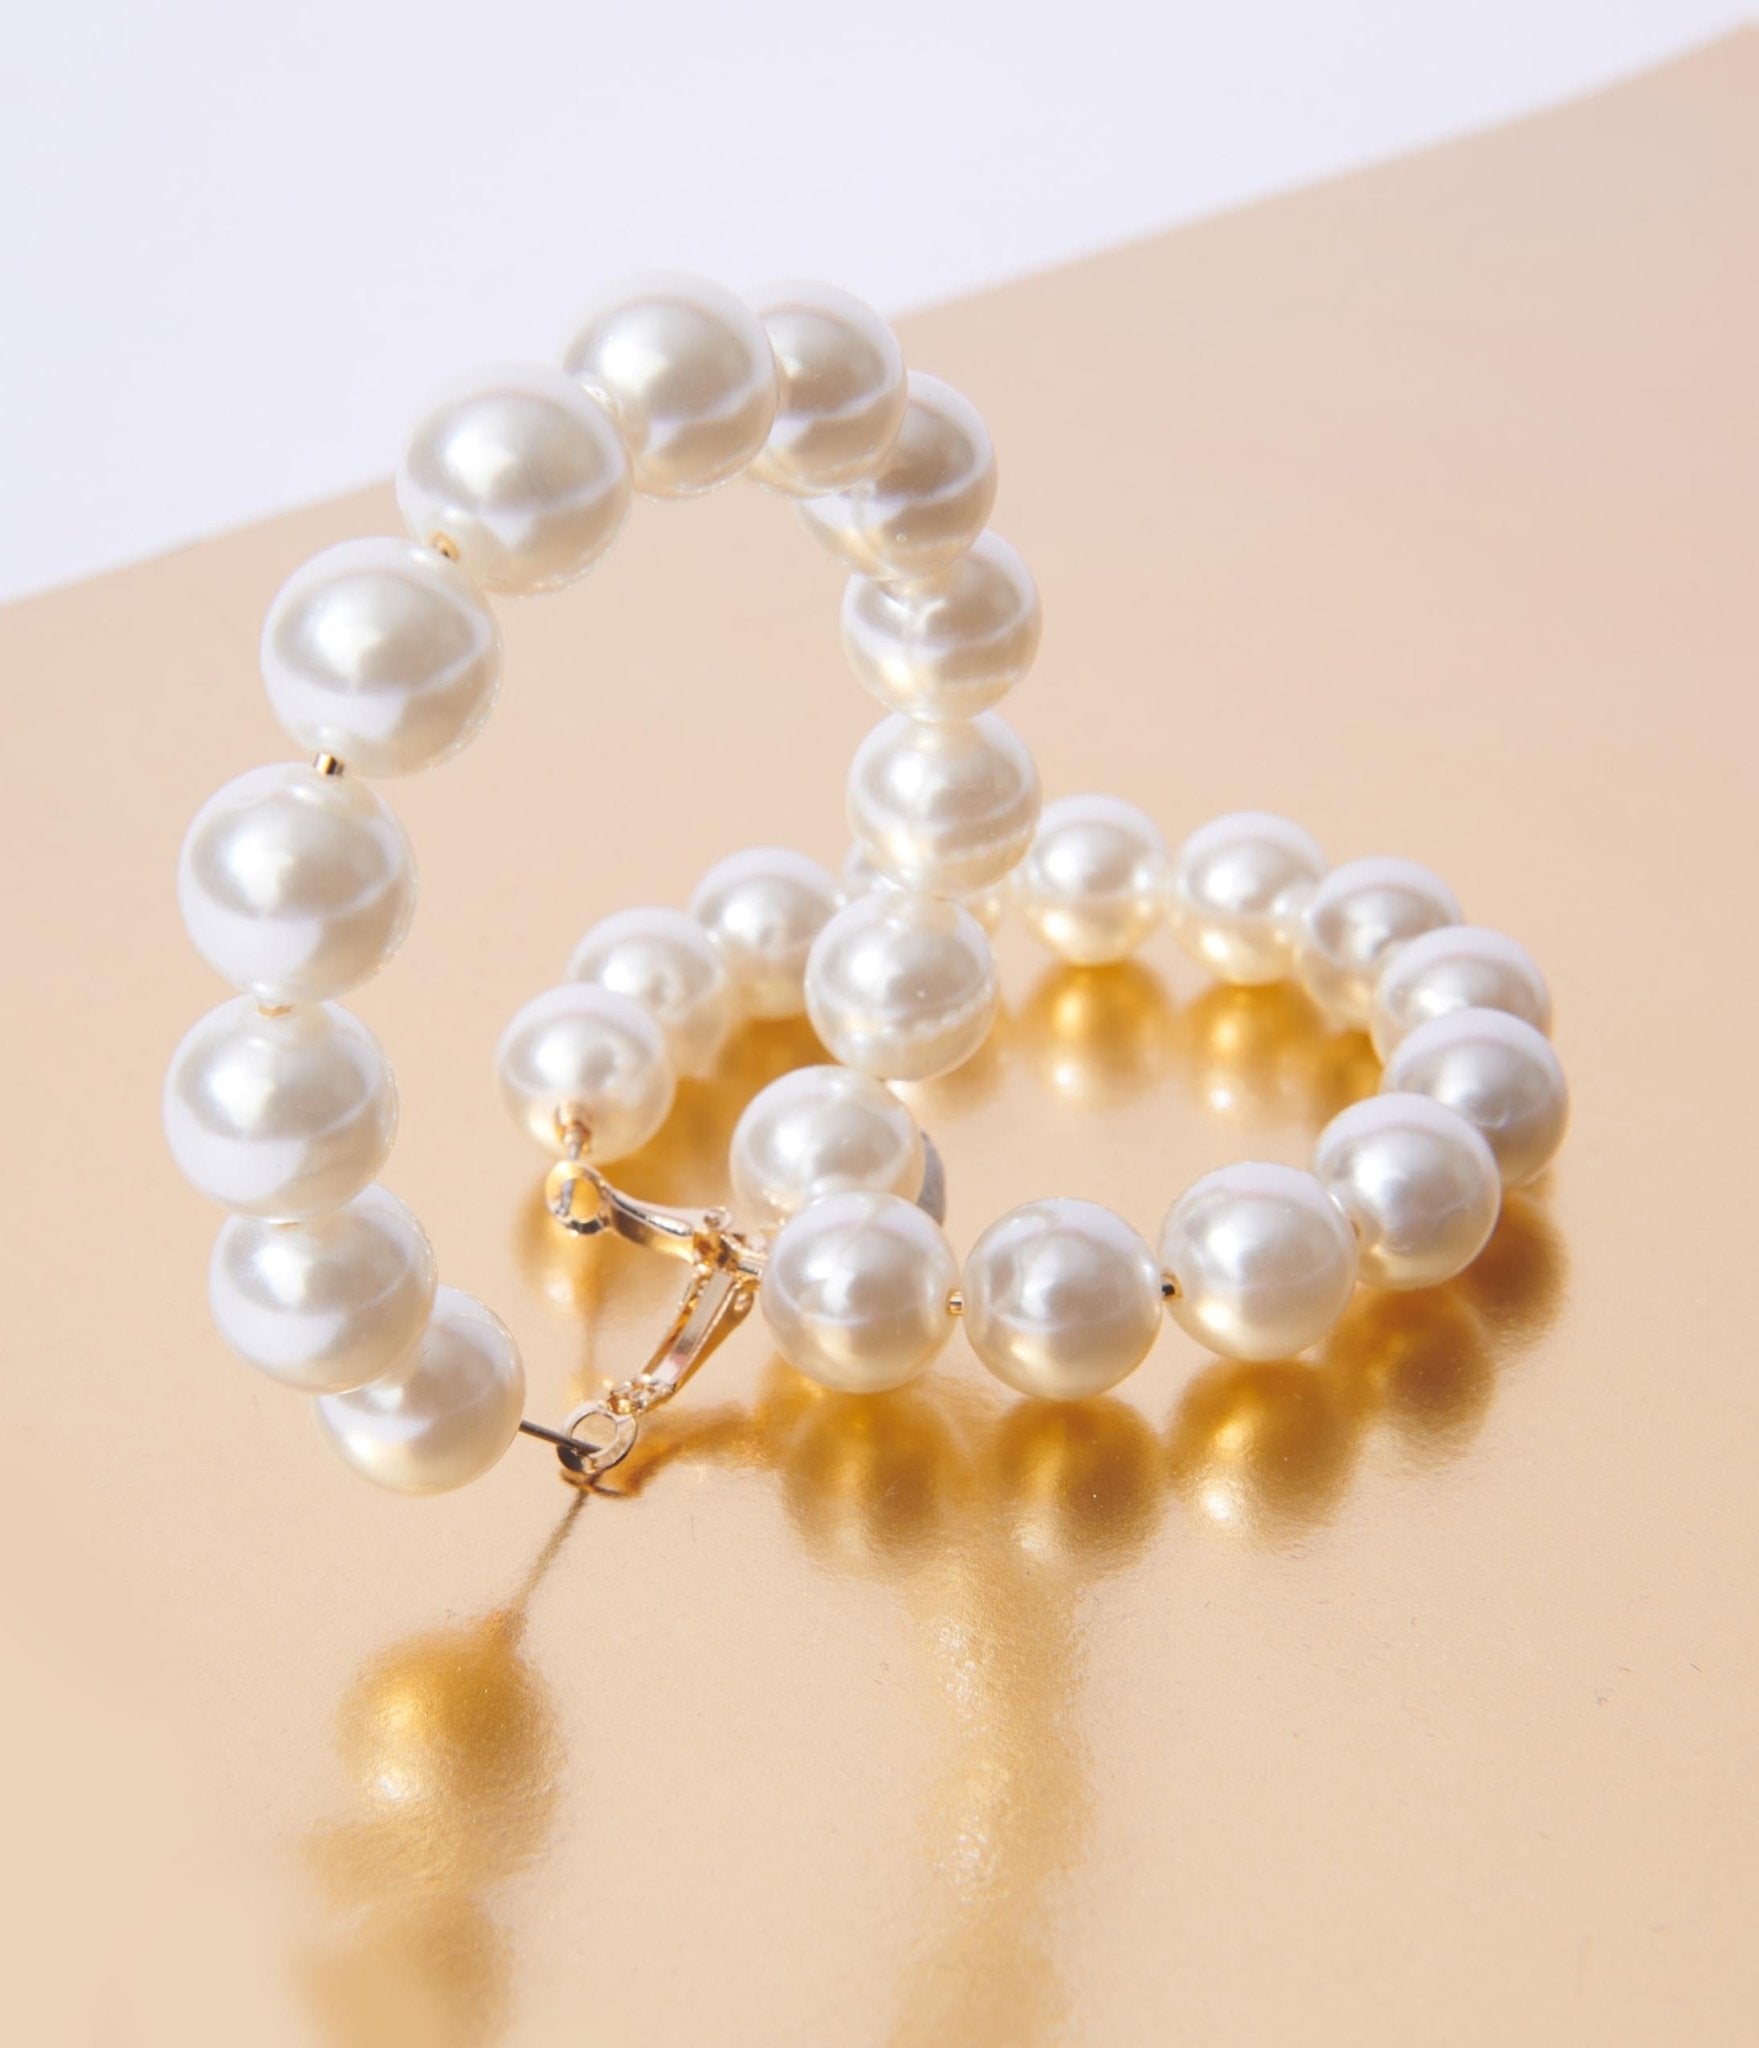 Pearl Necklace & Earring Sets - Wholesale Bridal, Wedding & Prom Jewelry -  Mariell Bridal Jewelry & Wedding Accessories